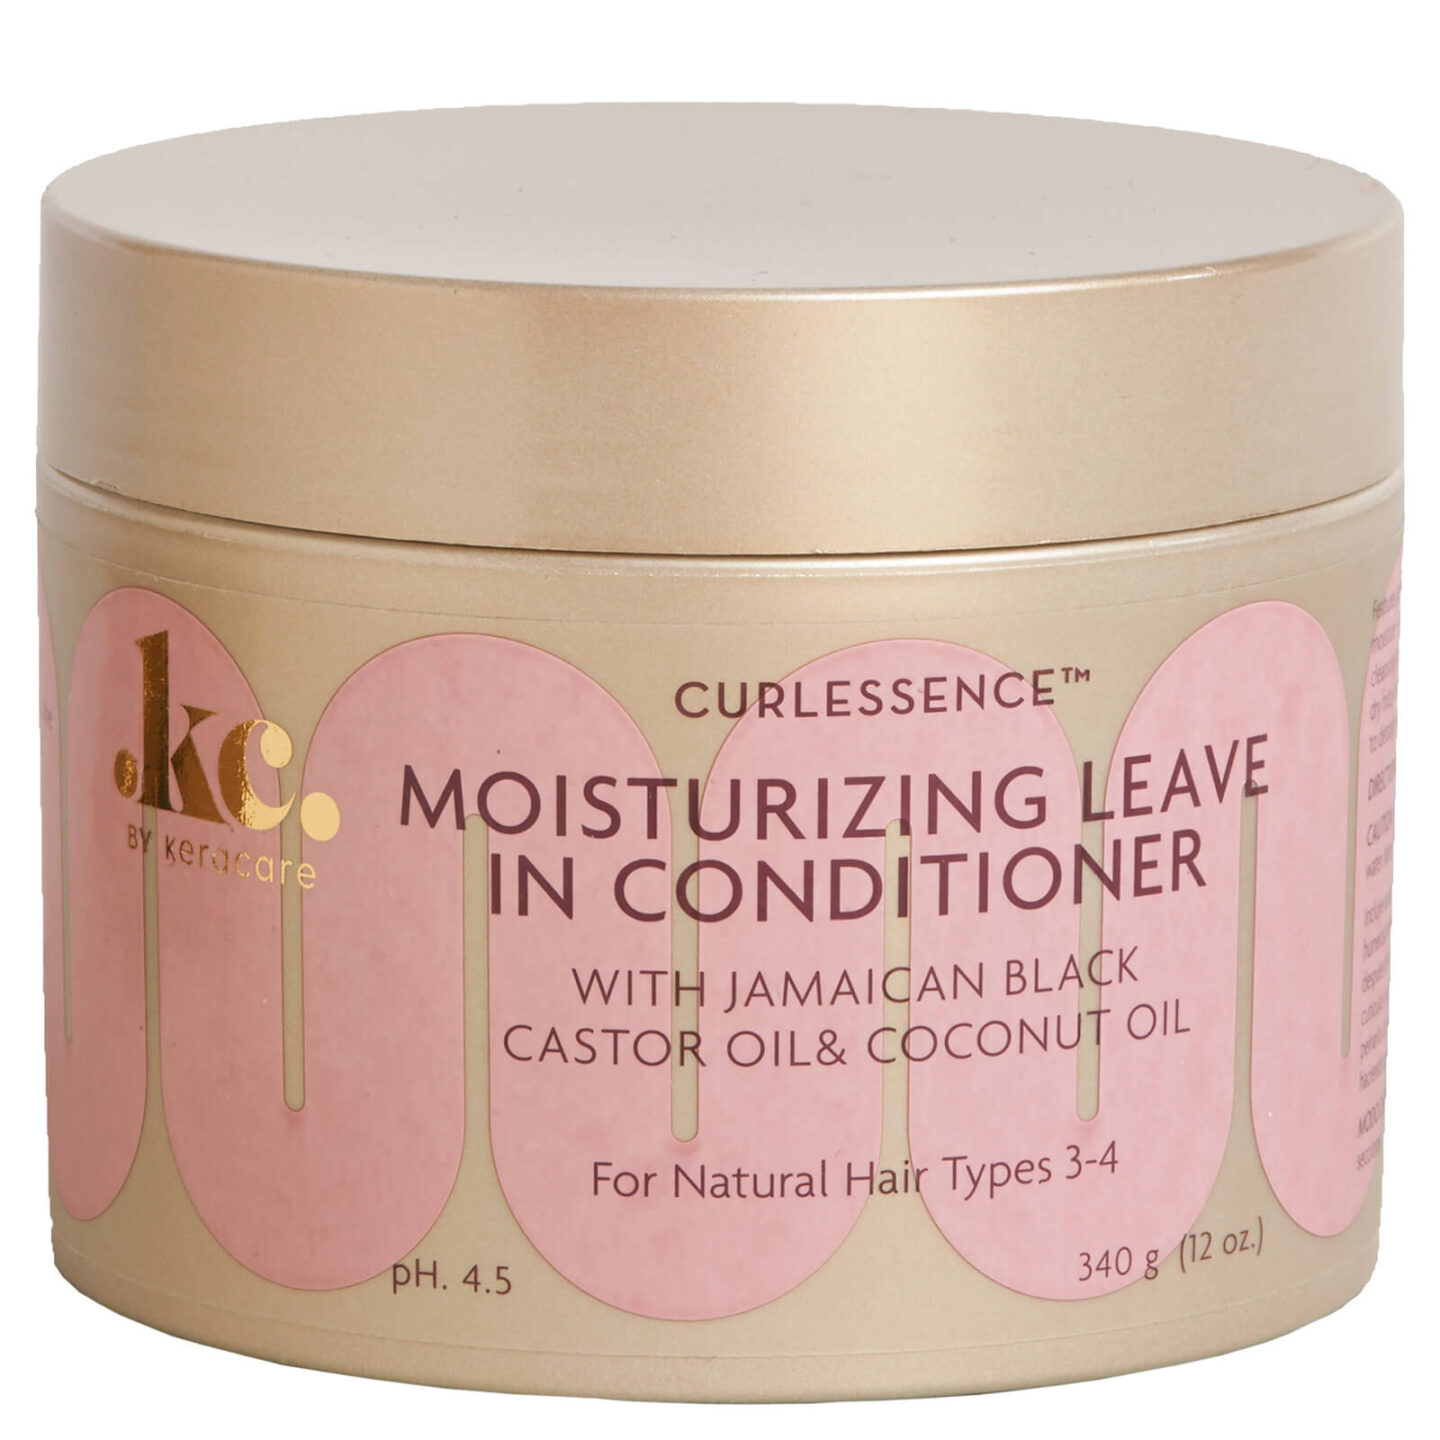 KeraCare Curlessence Moisturizing Leave in Conditioner